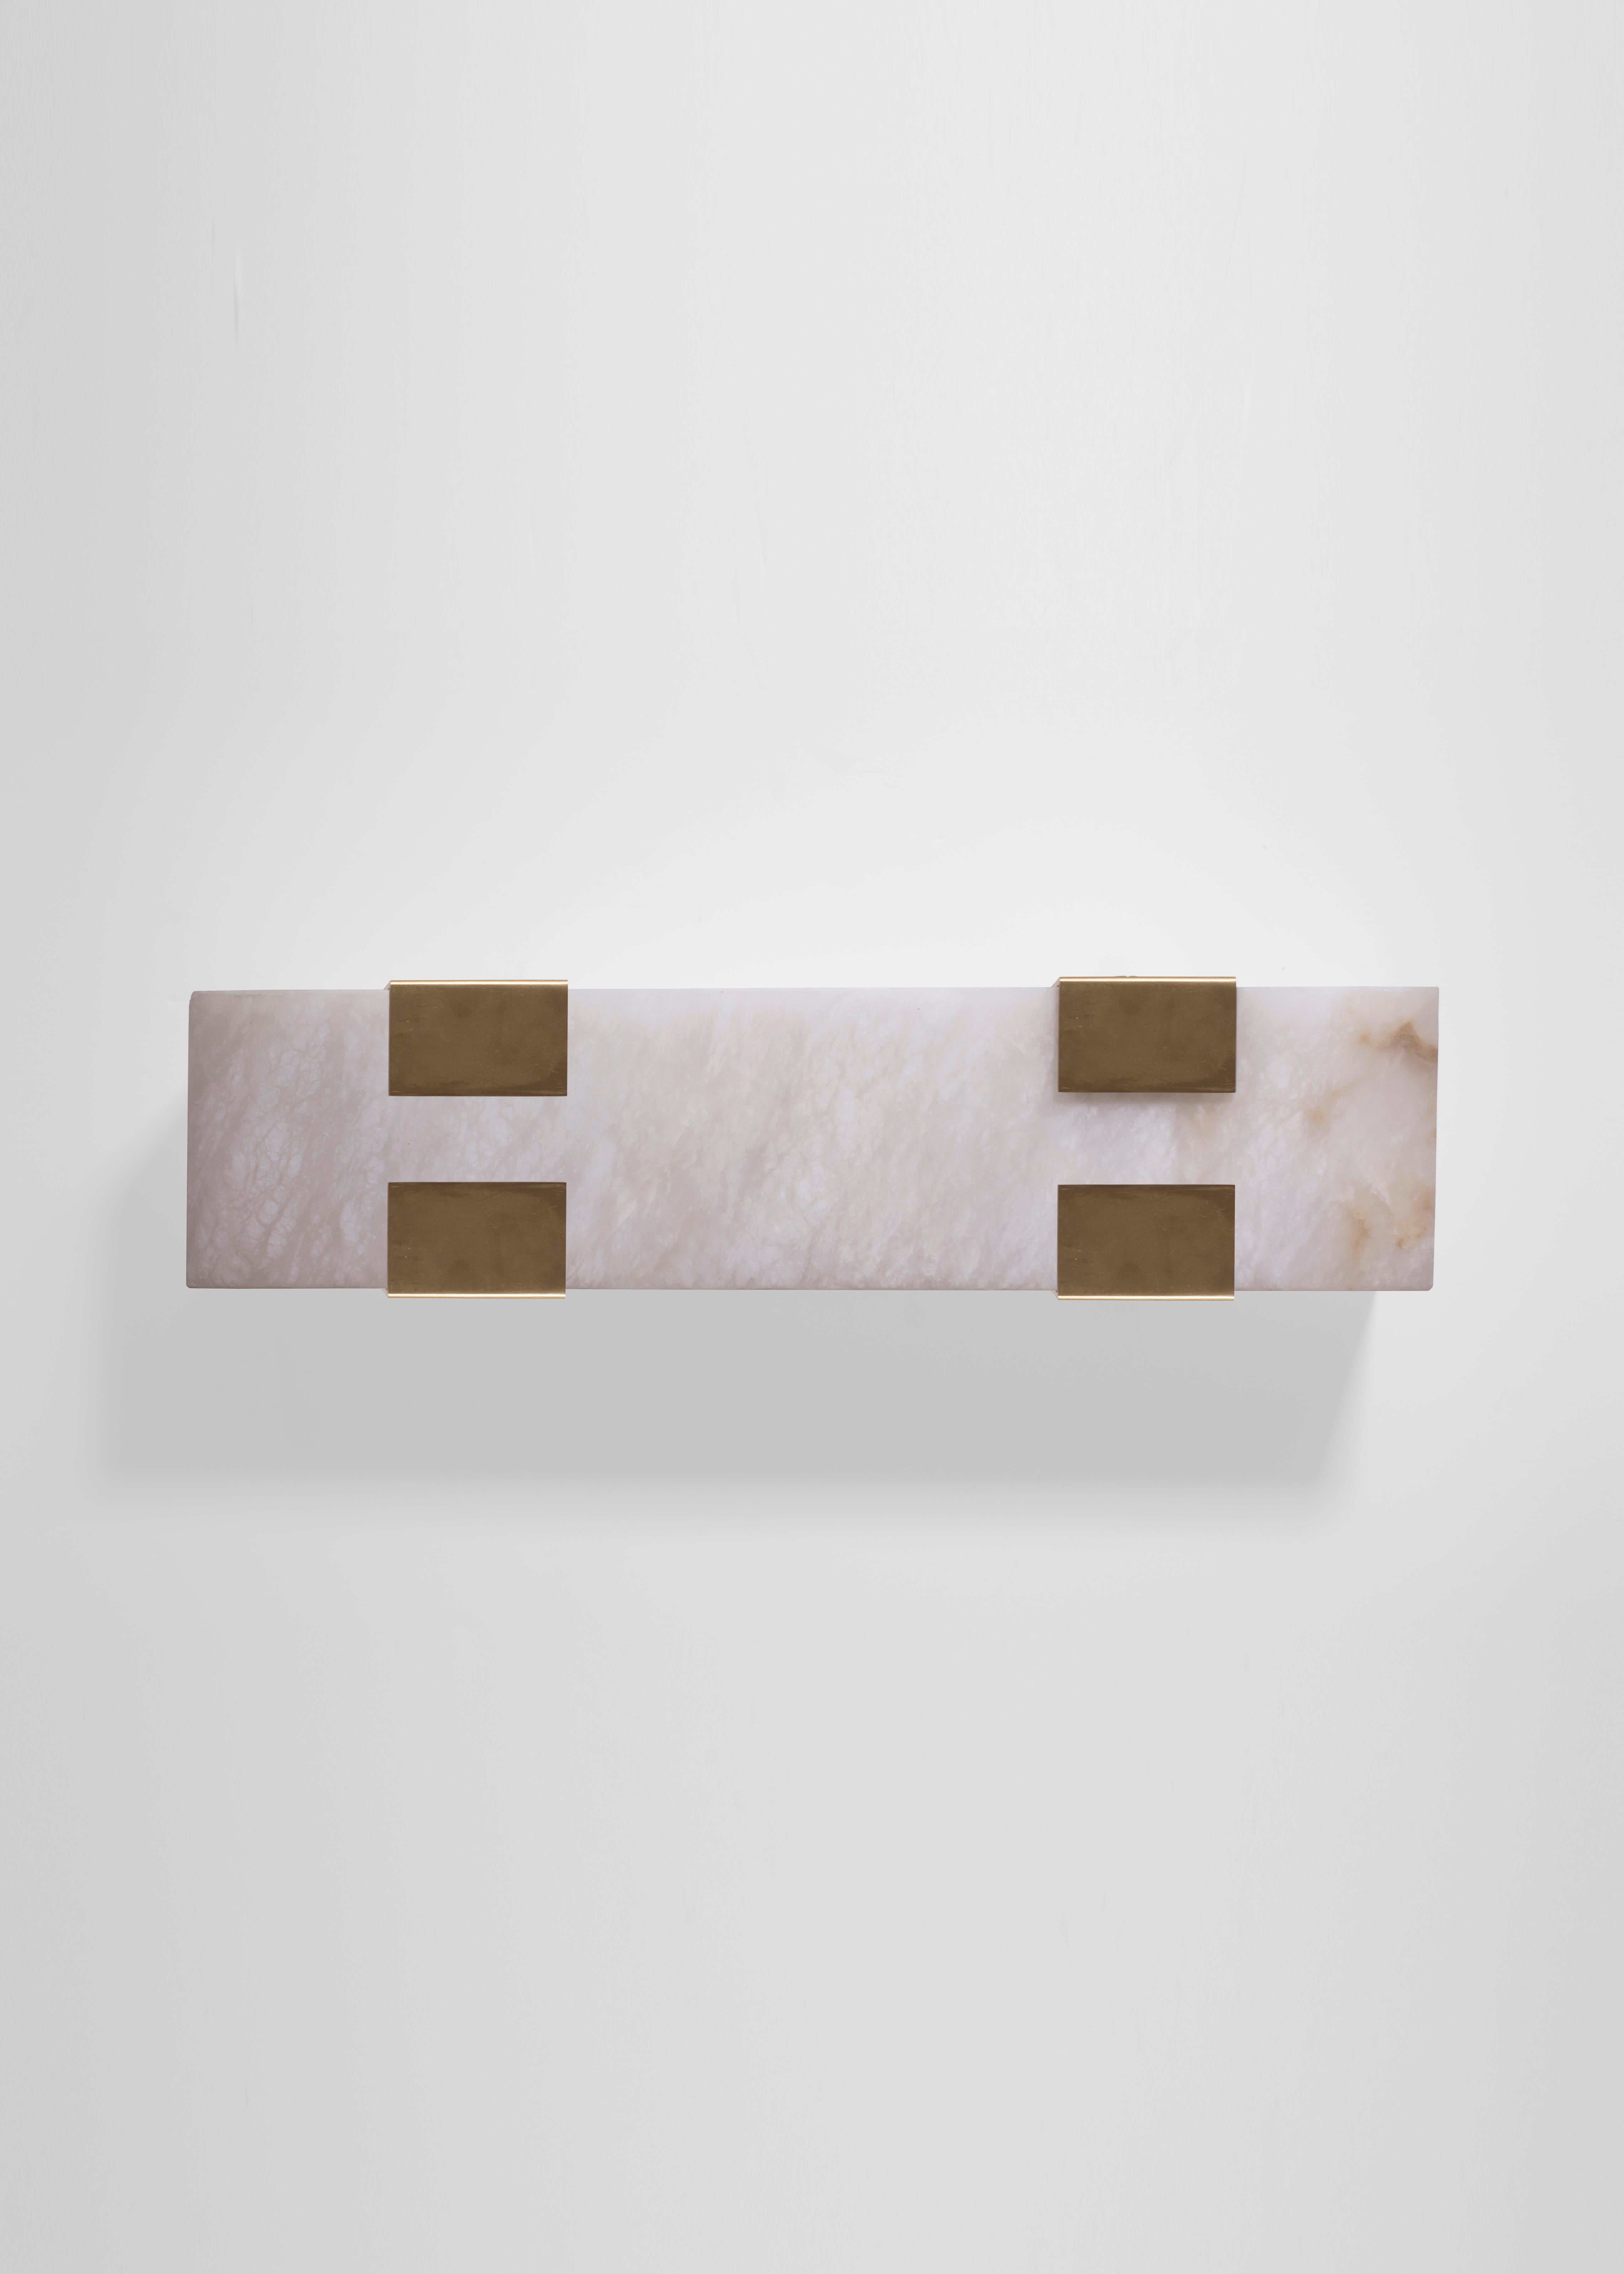 Orphan Work 003-4C Sconce, 2018
Shown in brushed brass and alabaster 
Available in brushed brass, brushed nickel and blackened brass. 
Measures: 5 3/8”H x 19”W x 3 7/8”D
Wall or ceiling mount
Vertical or horizontal
Plug-in by request
1-4 adjustable